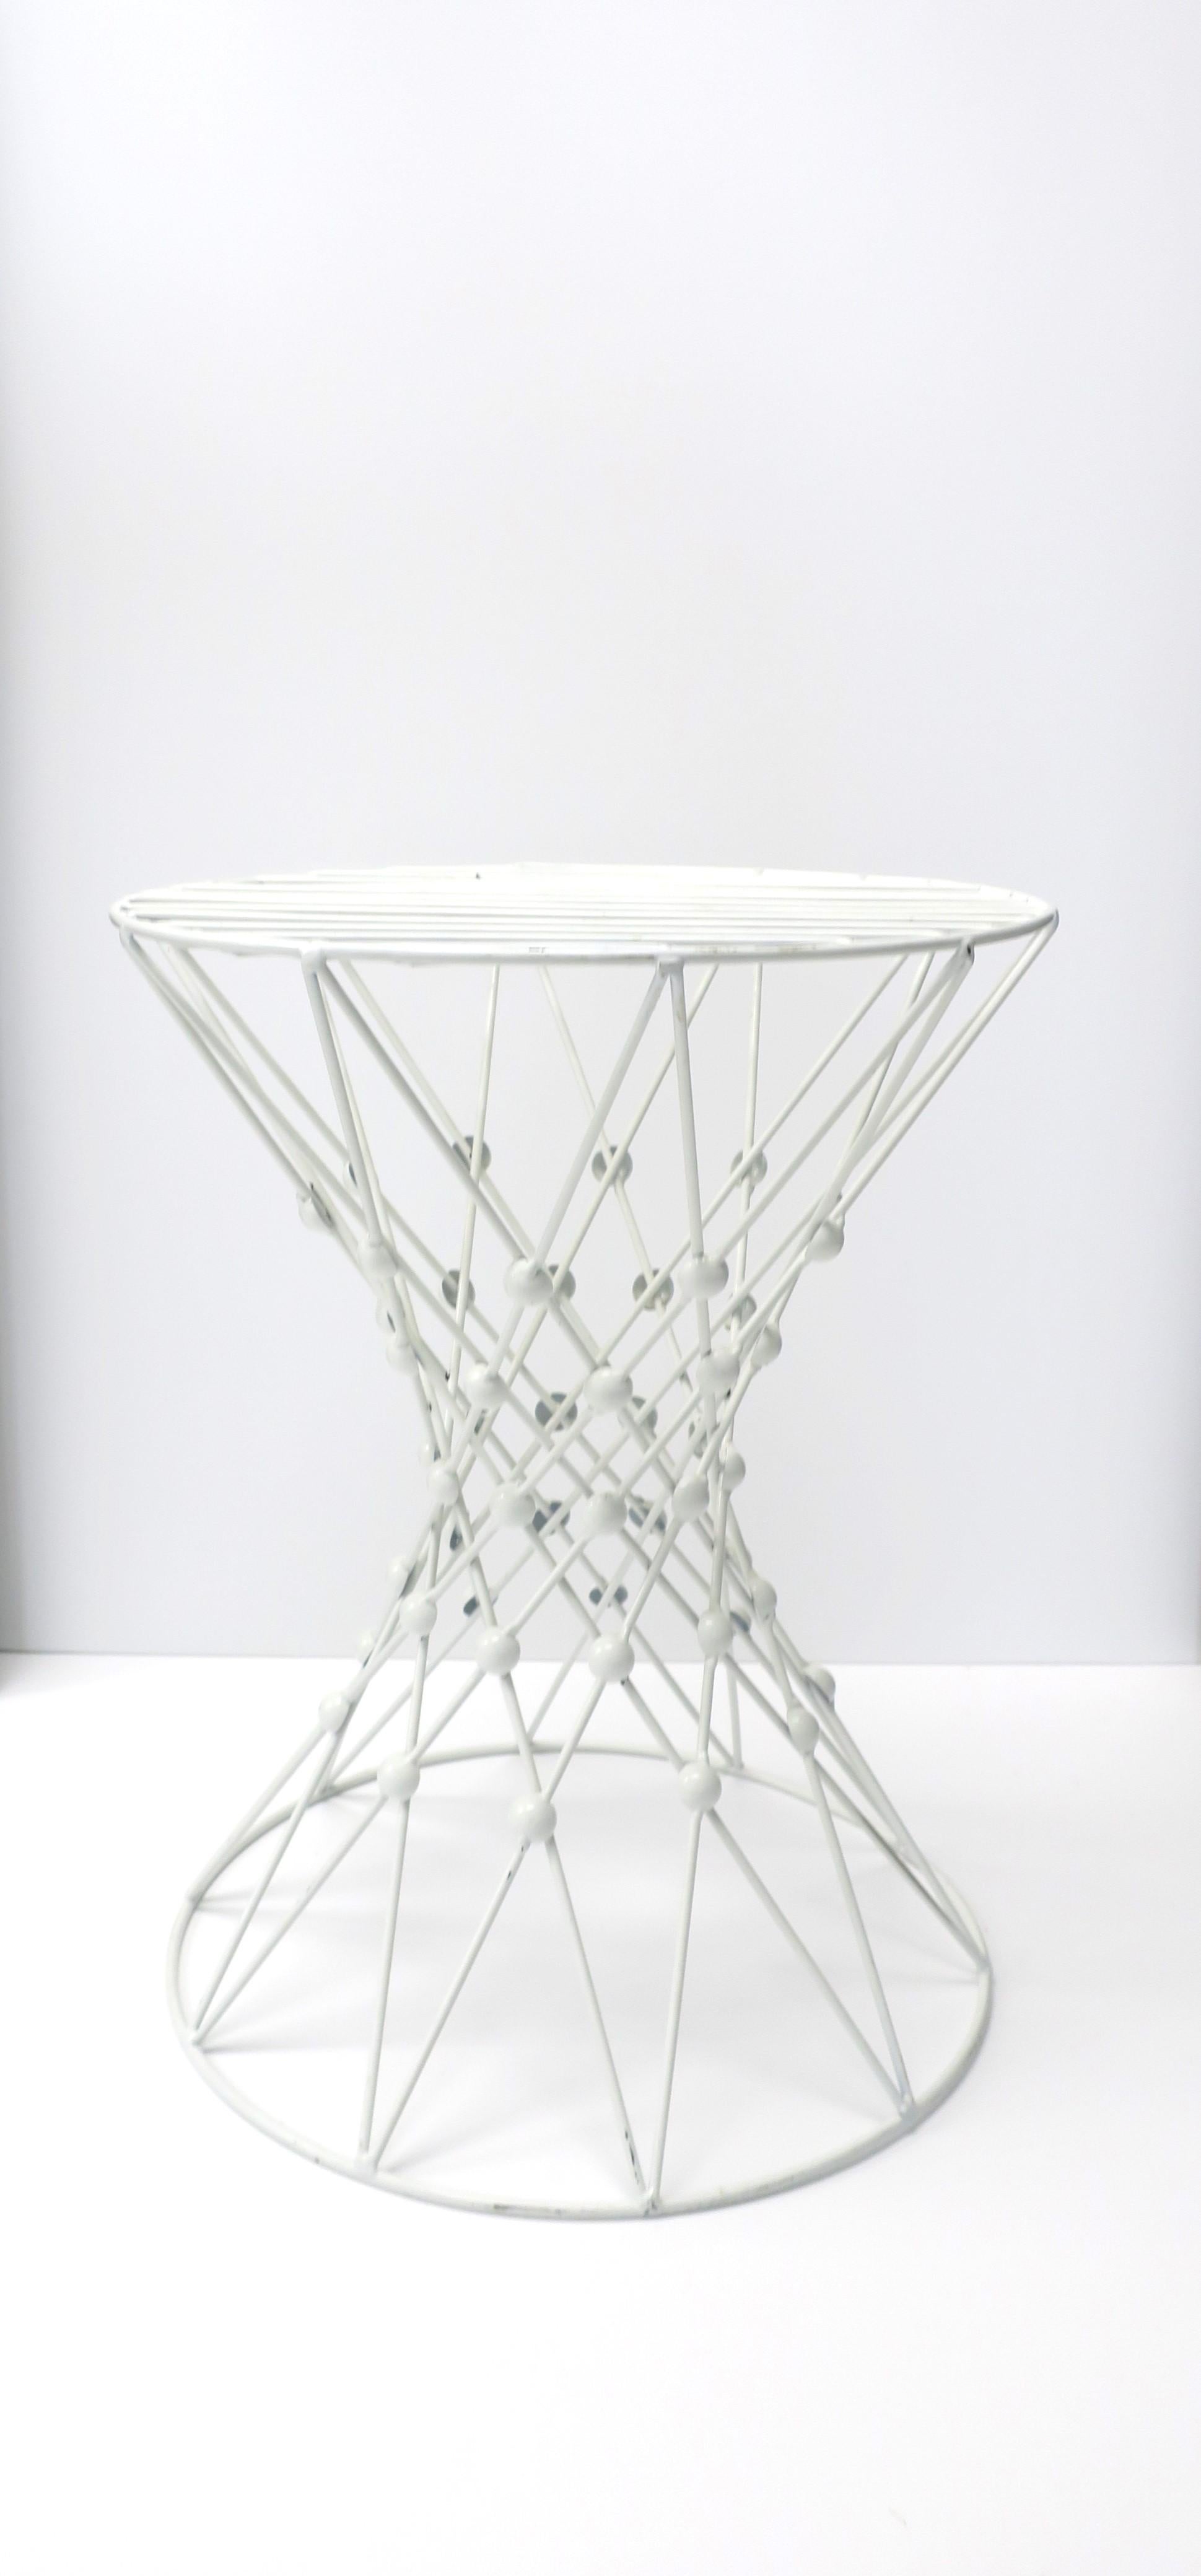 A white enamel and metal side table with a crisscross design and hourglass shape. A versatile side, accent, or drinks table, etc. Dimensions: 15.38